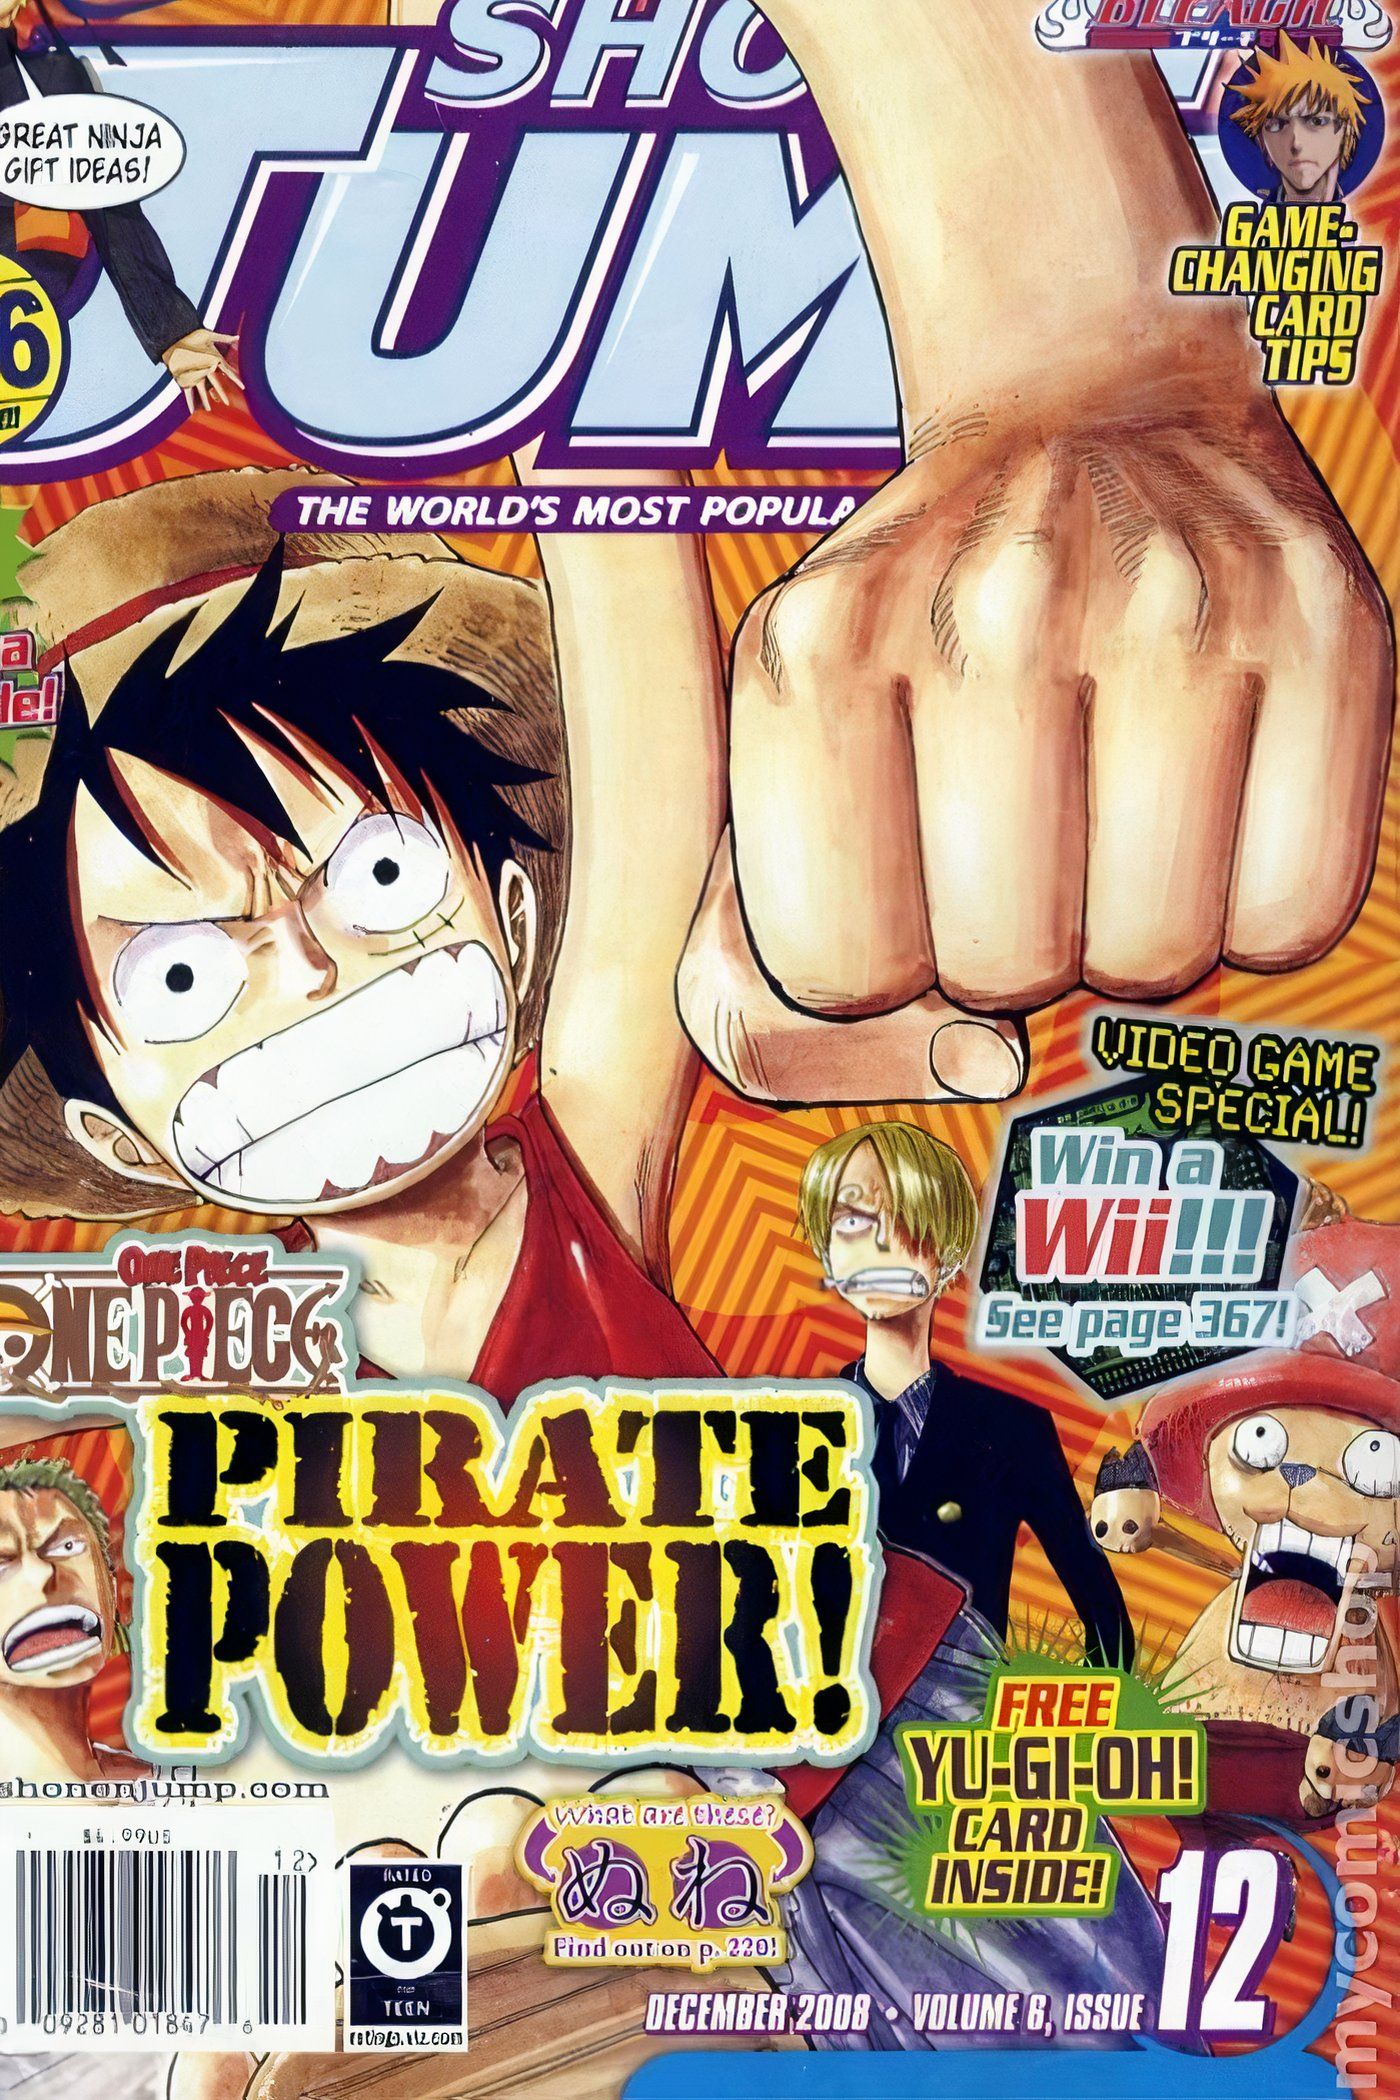 American Weekly Shonen Jump 72 featuring Luffy, Zoro, Sanji, and Chopper from One Piece